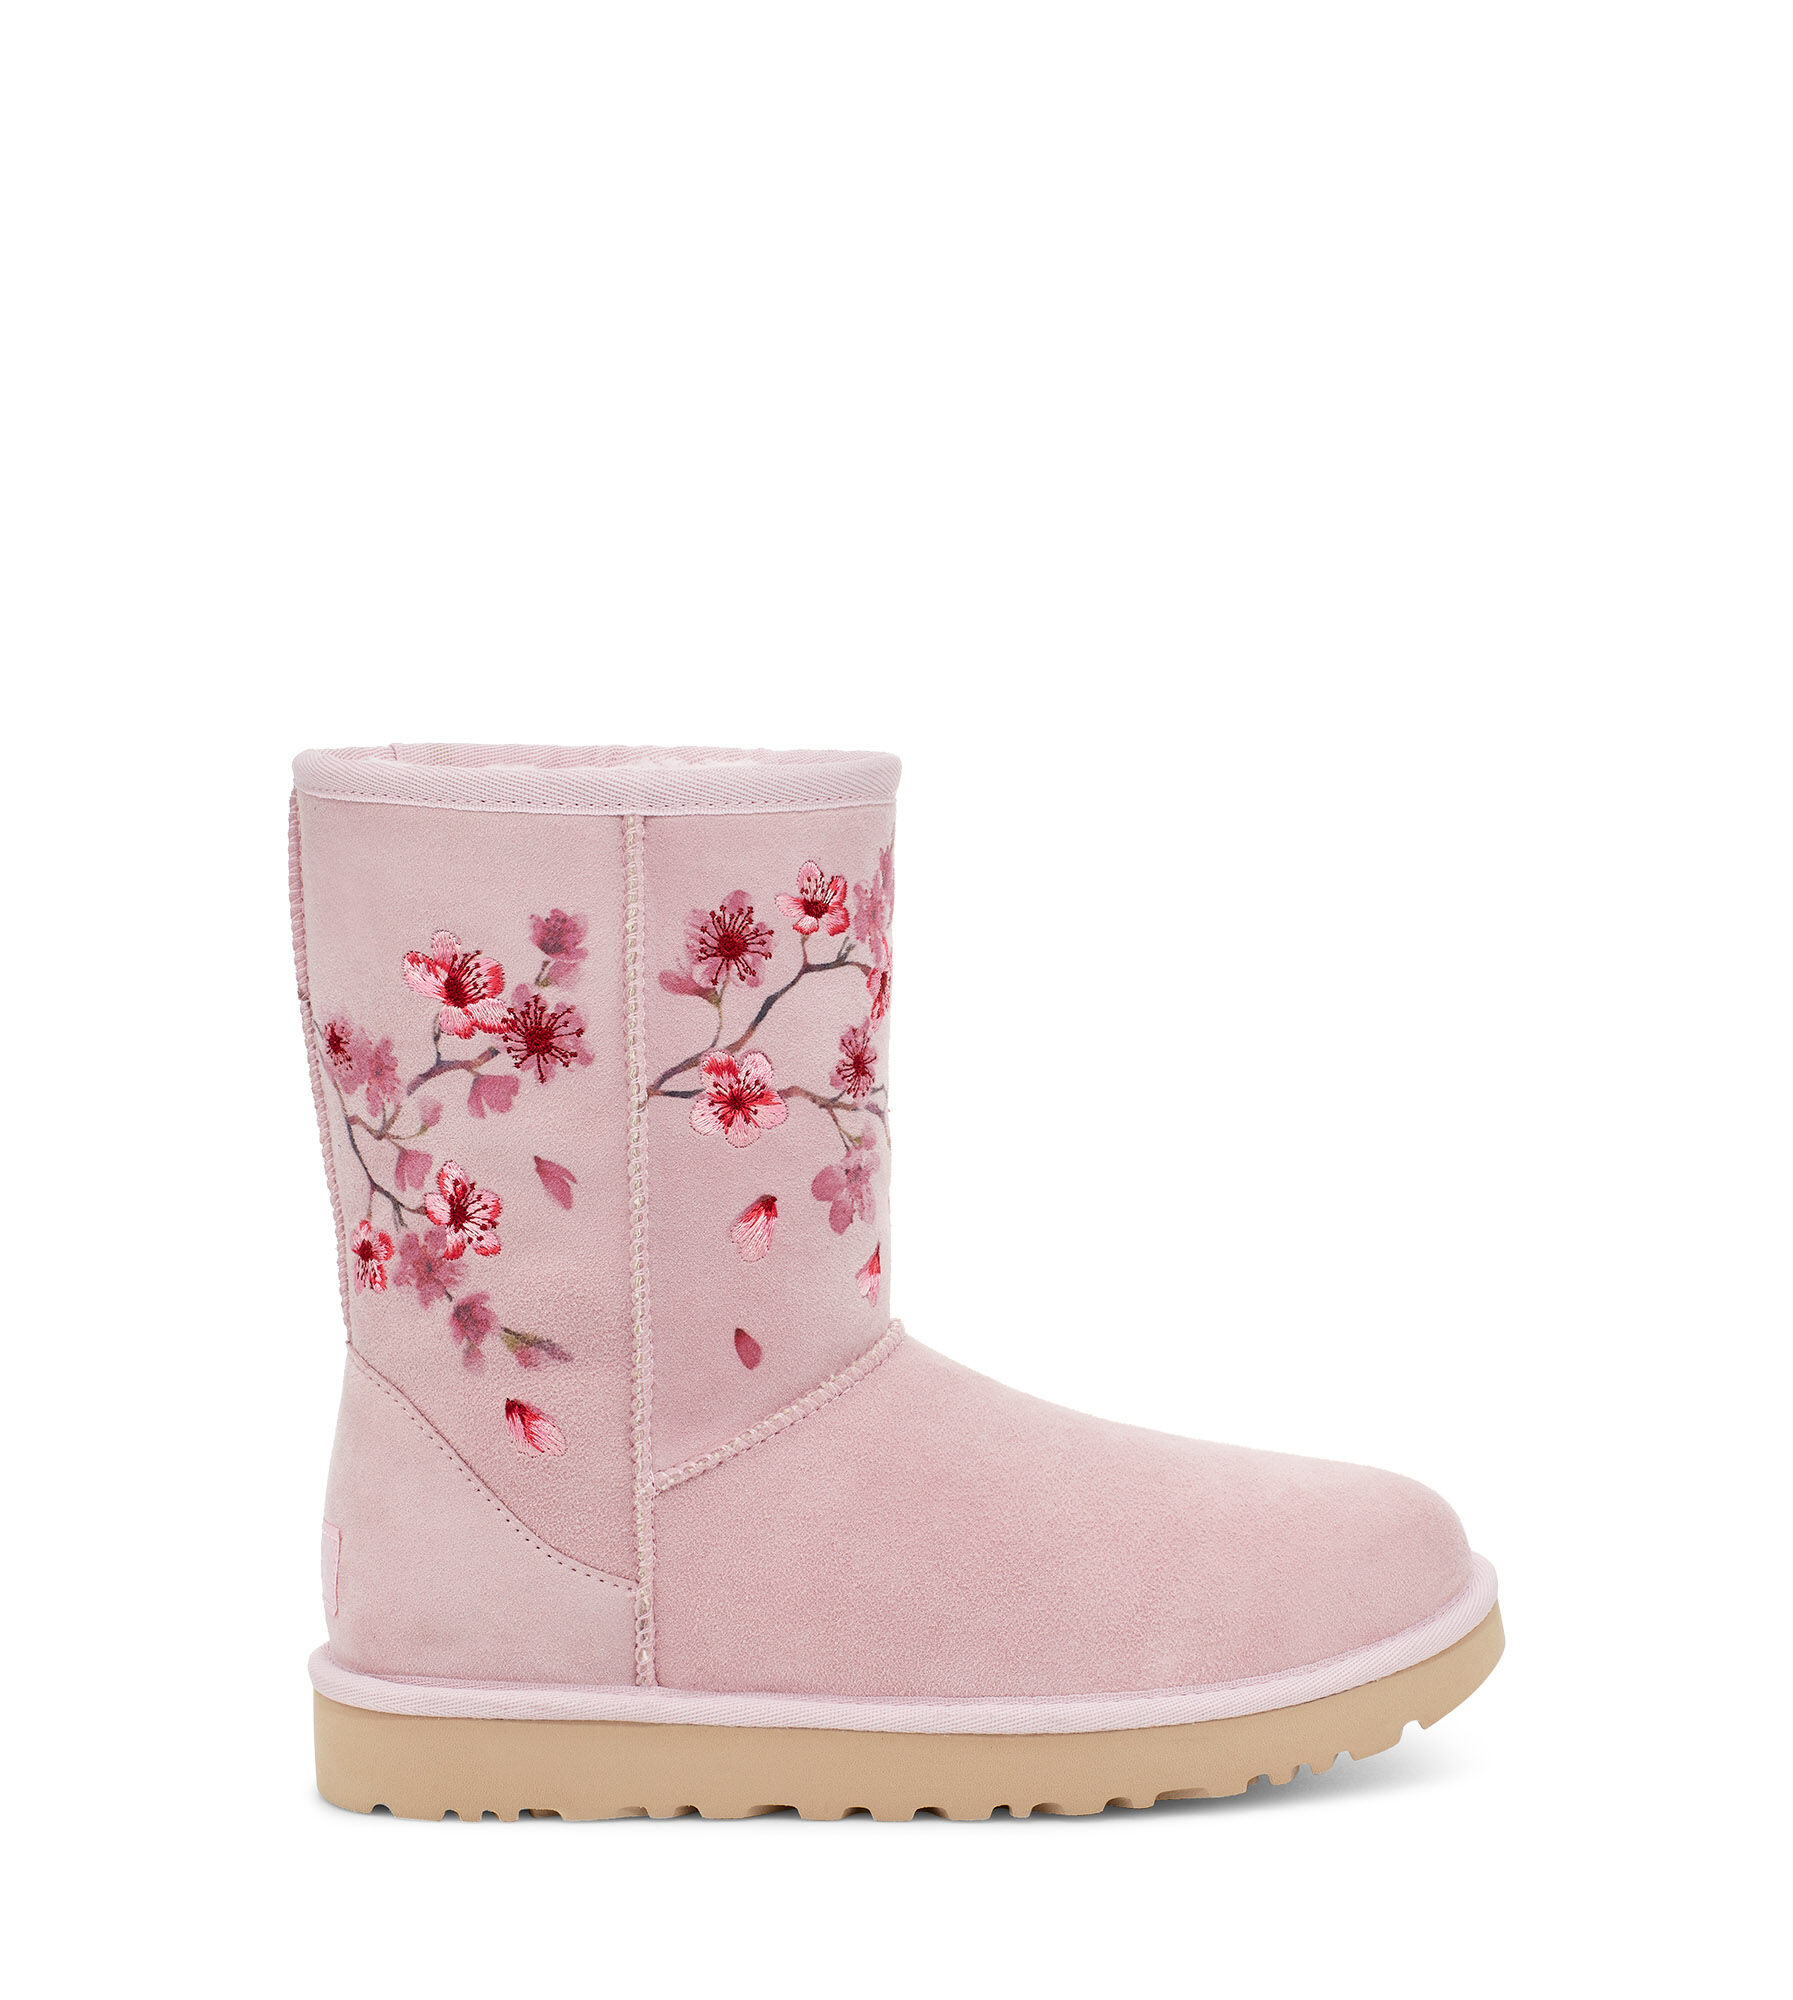 brown and pink uggs